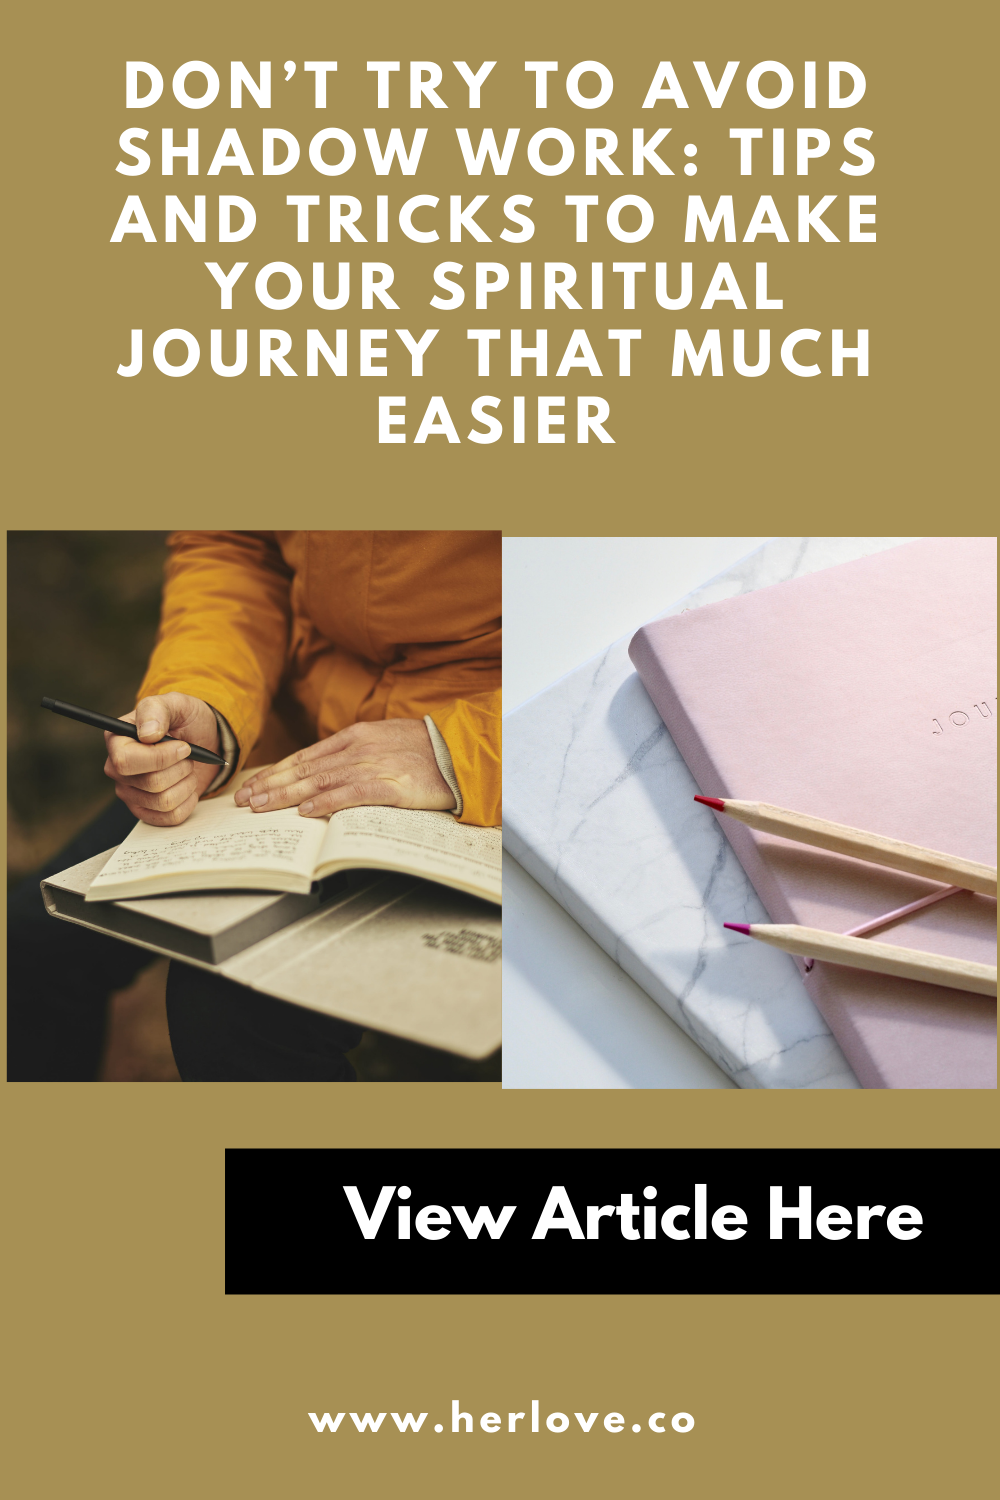 Don’t Try to Avoid Shadow Work: Tips and Tricks to Make Your Spiritual Journey That Much Easier